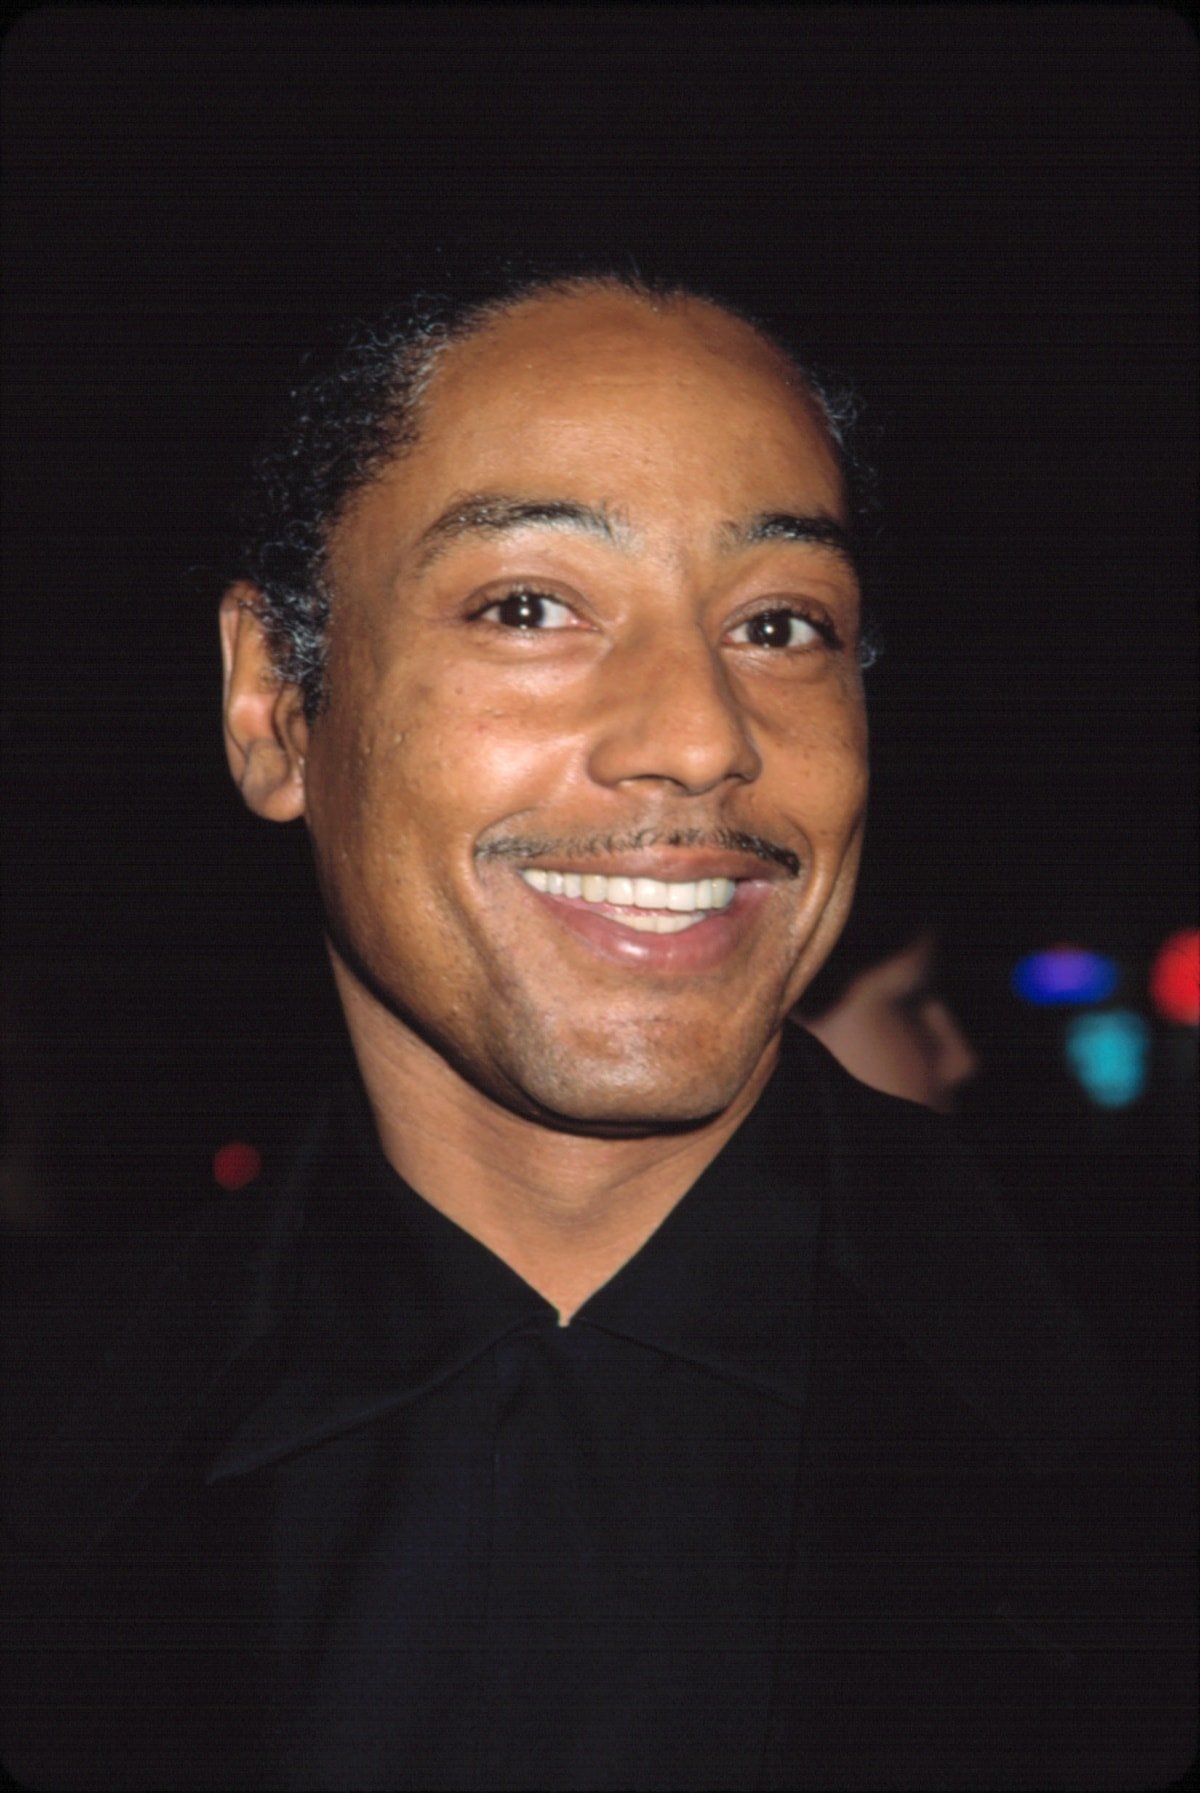 Giancarlo Esposito, born on April 26, 1958, was 43 years old at the time of the Piñero premiere in New York City on December 10, 2001